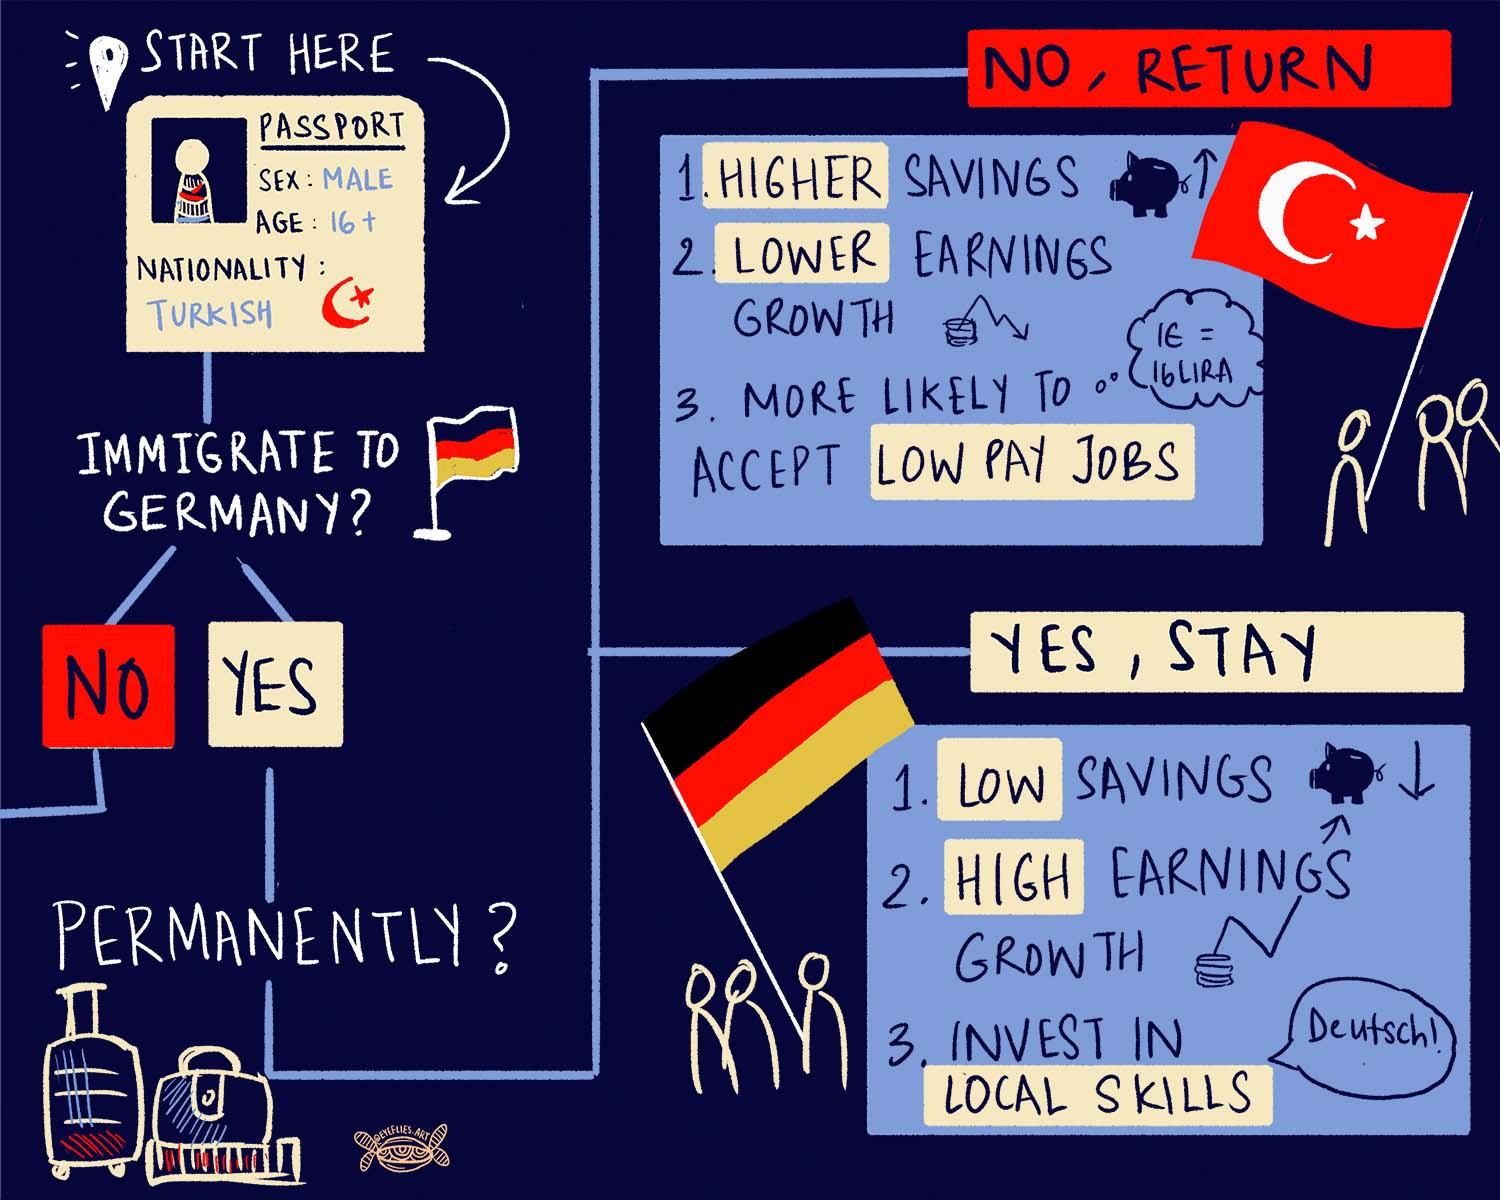 Infographic: an immigrant to a rich country who wants to return home will have higher savings, a lower rate of earning growth and is more likely to accept low-paying jobs, whereas an immigrant who decides to stay will have lower savings, higher salary growth rate and will invest in locally valuable skills.